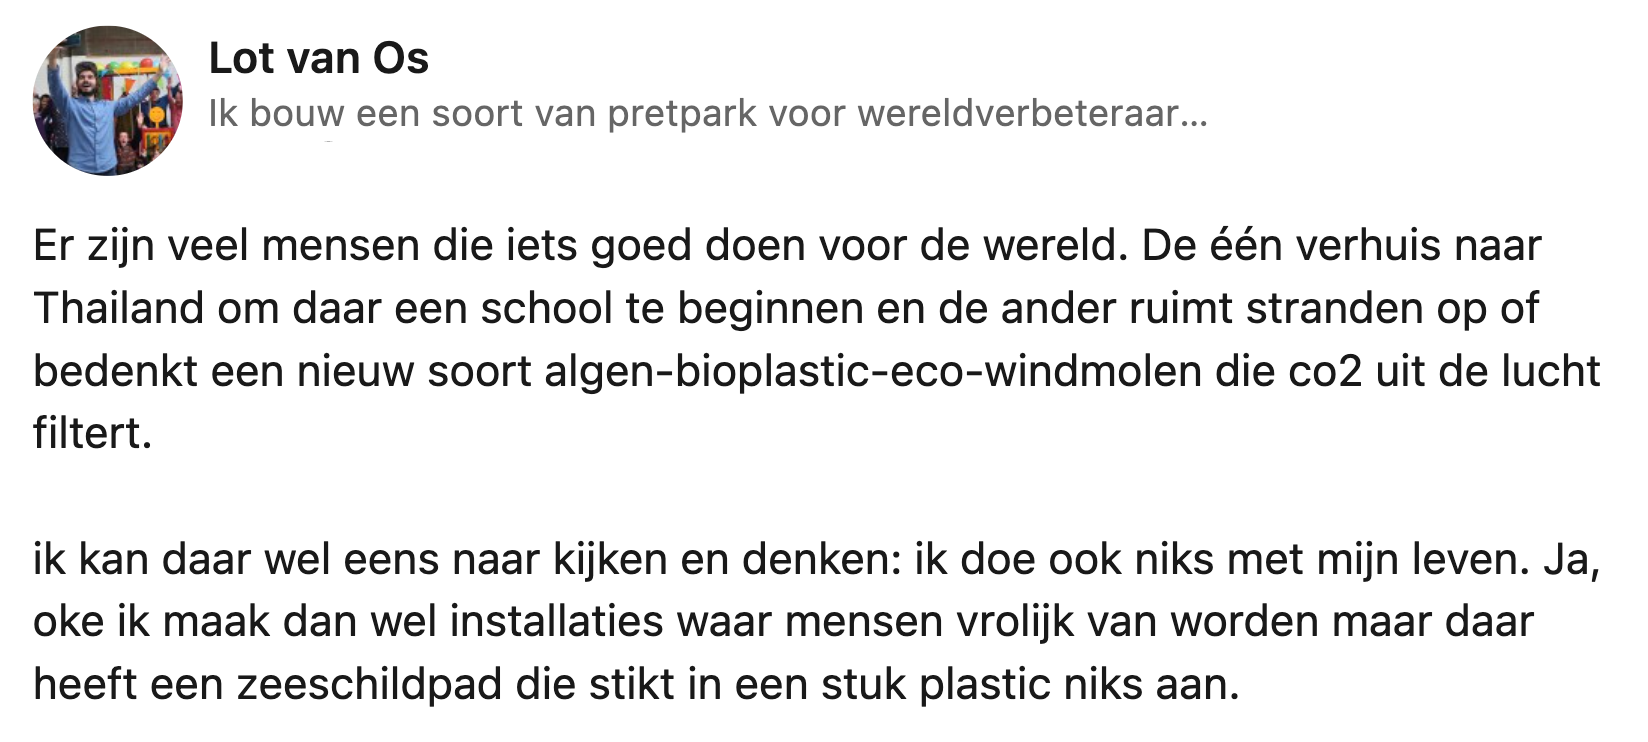 Linkedin comment 1 goede daad